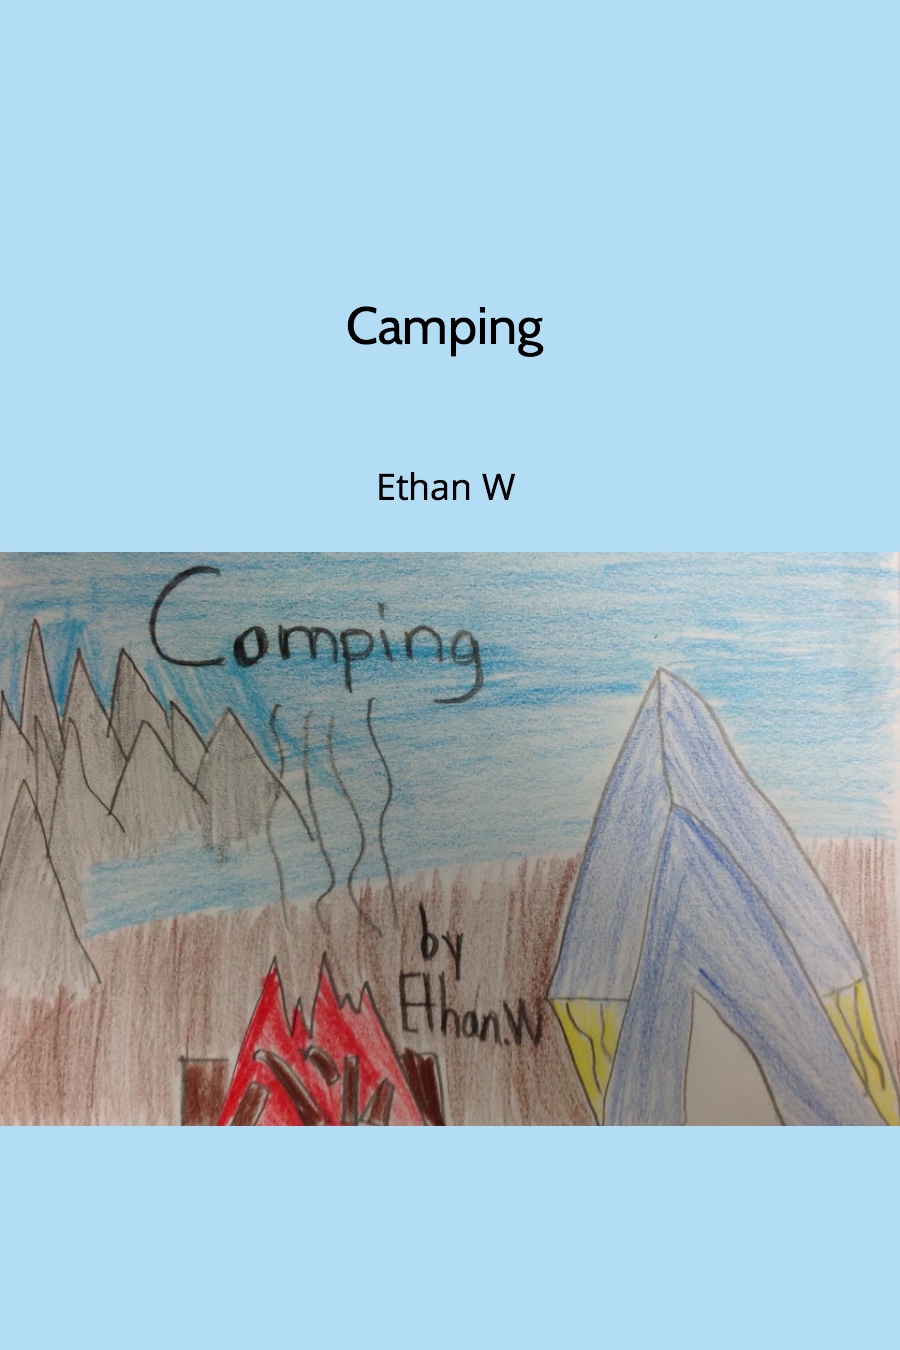 Camping by Ethan W